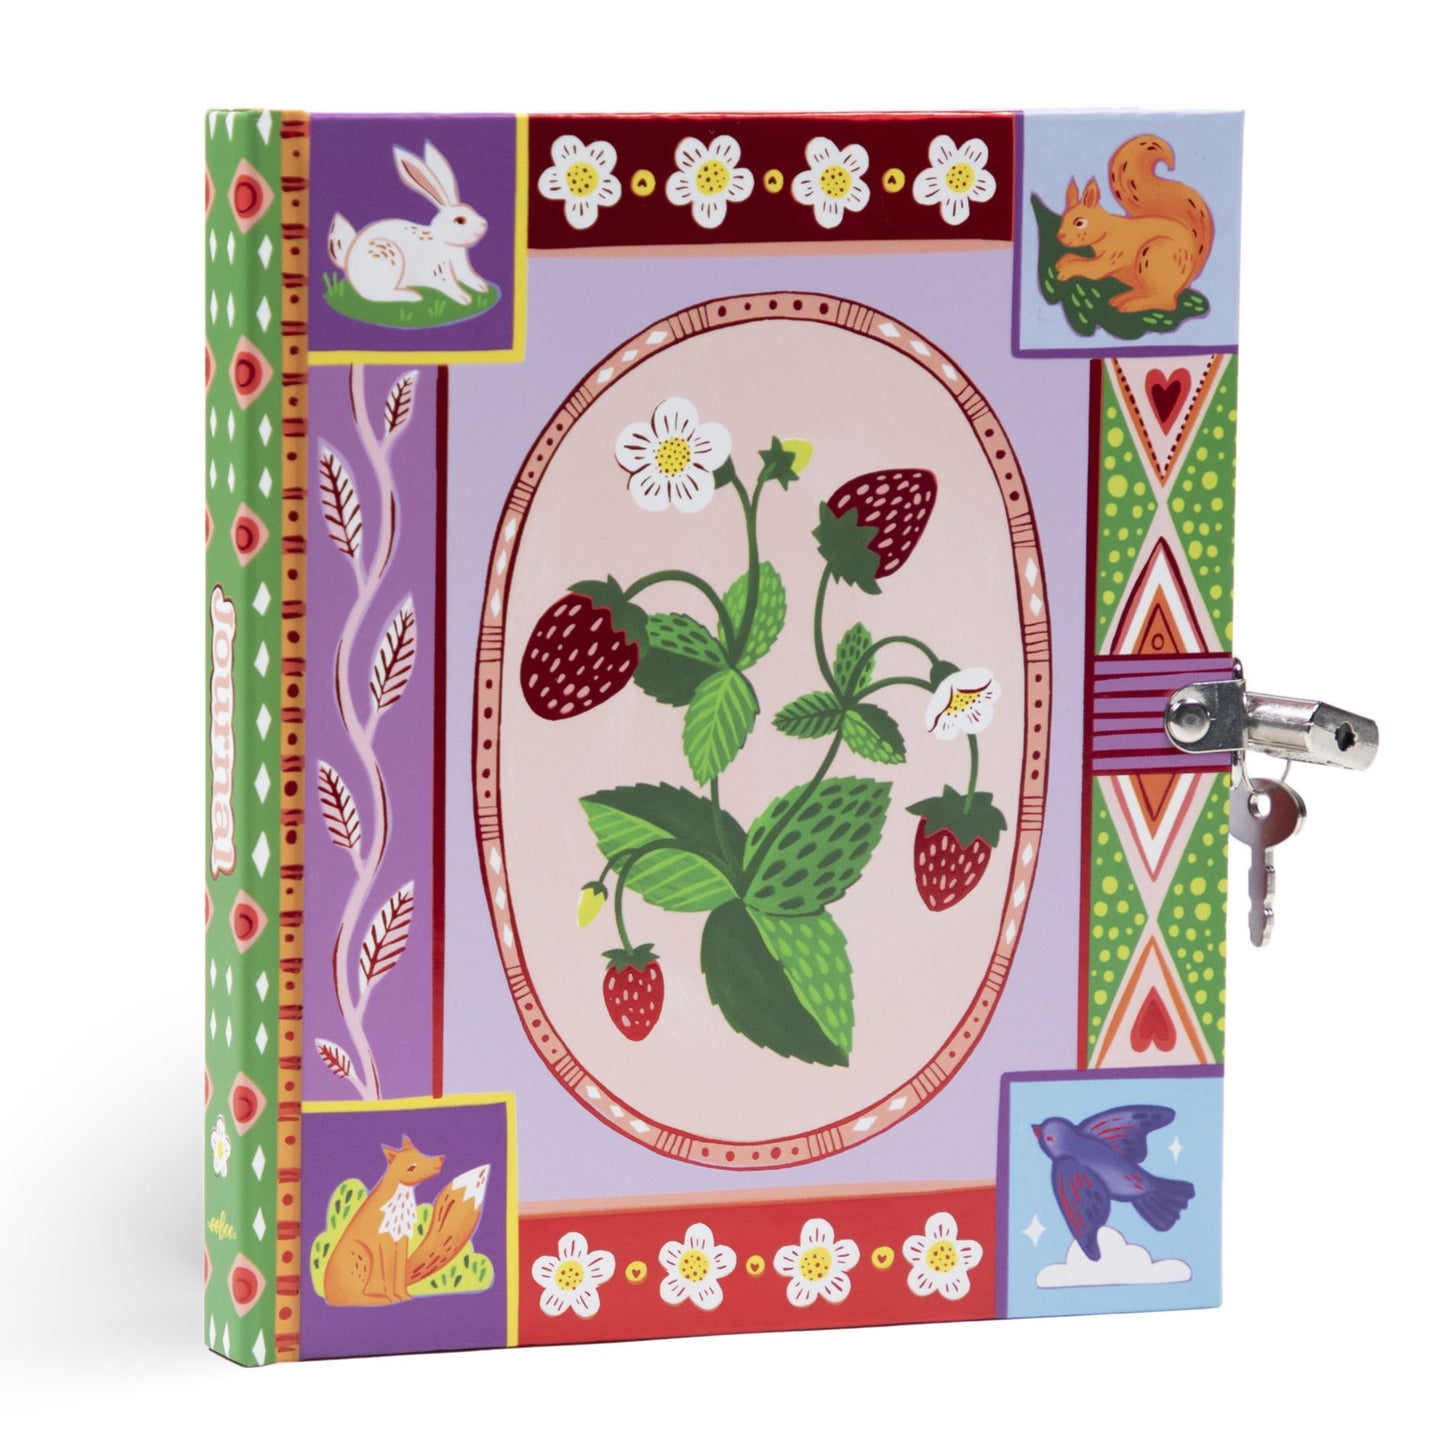  Strawberries Journal Diary eeBoo Fun Unique Gifts for Kids Ages 3-9